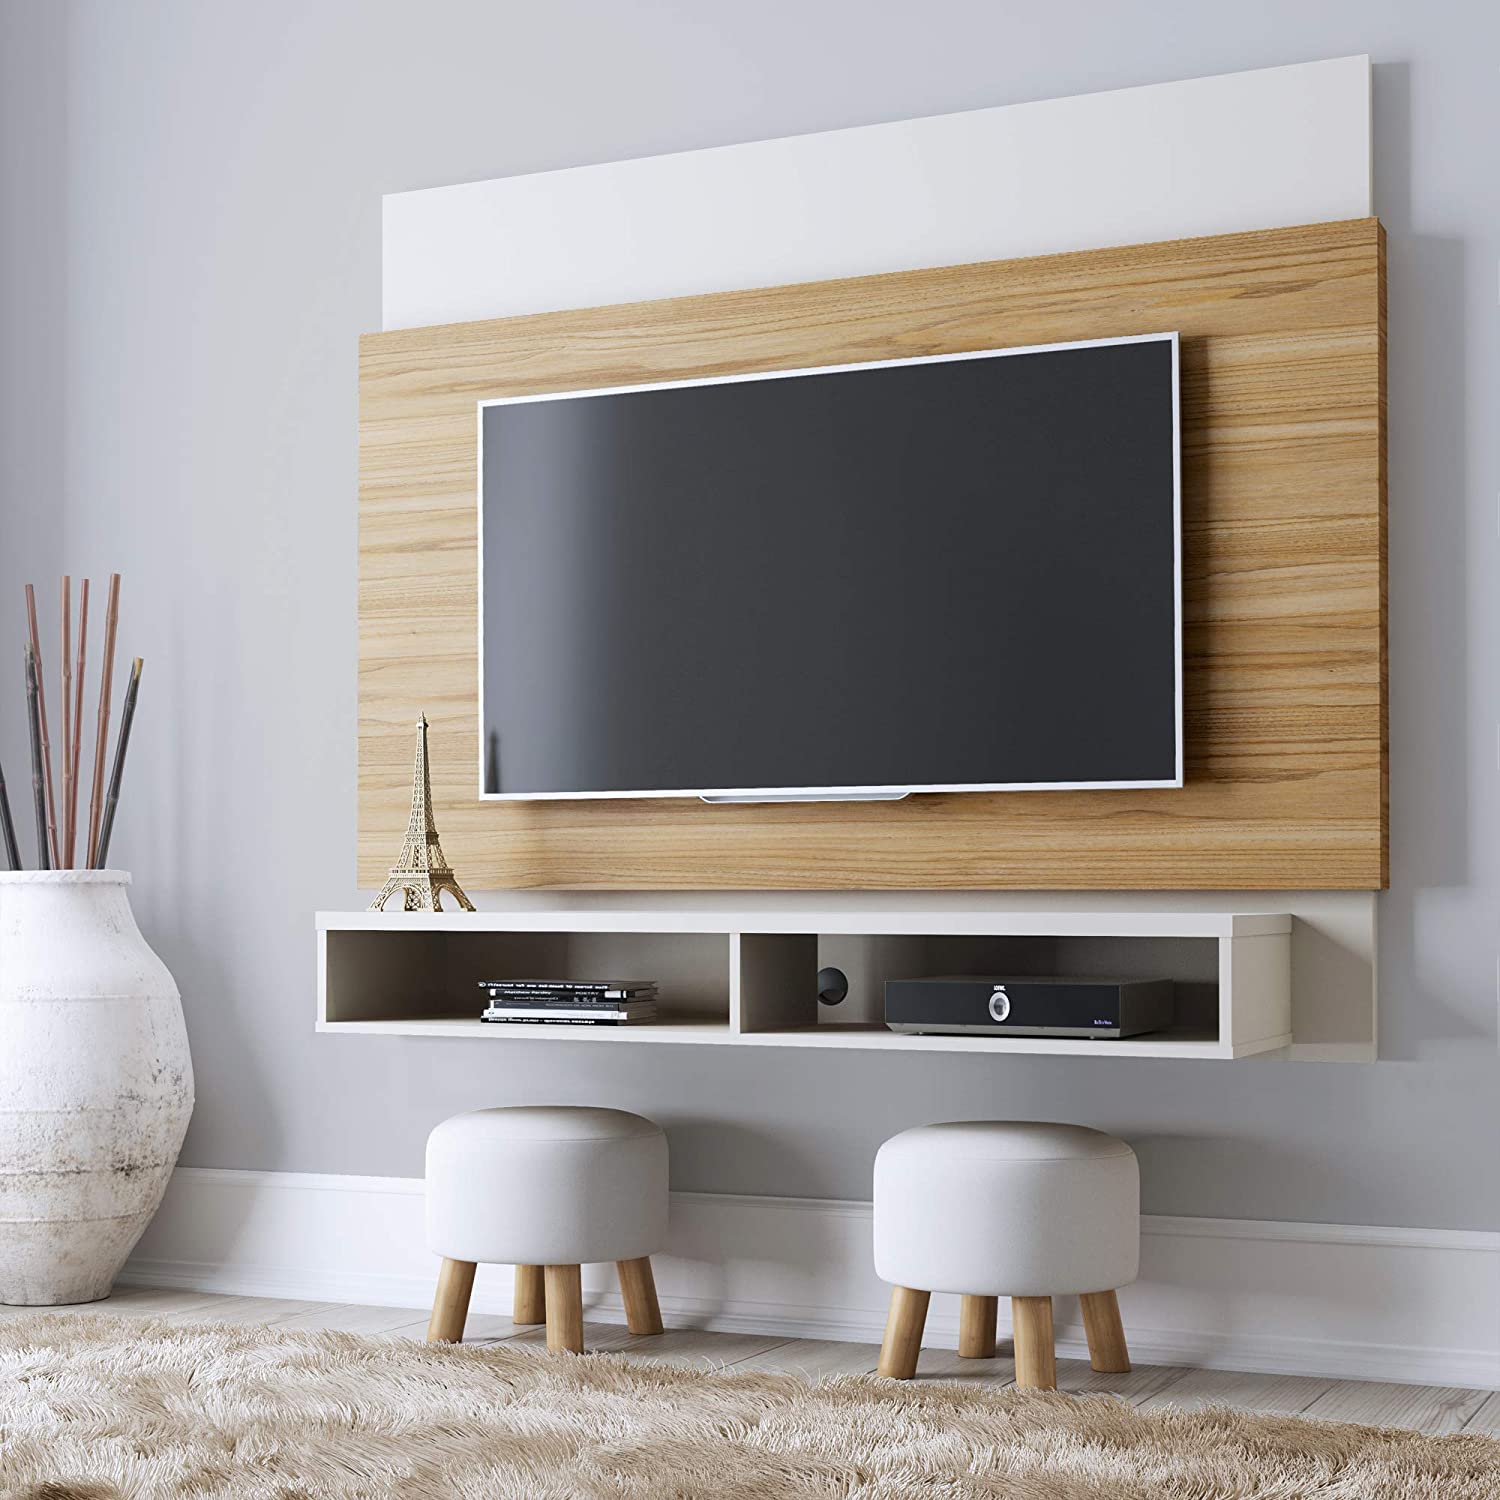 Wall Mounted Television, Mounted Tv With Floating Shelves